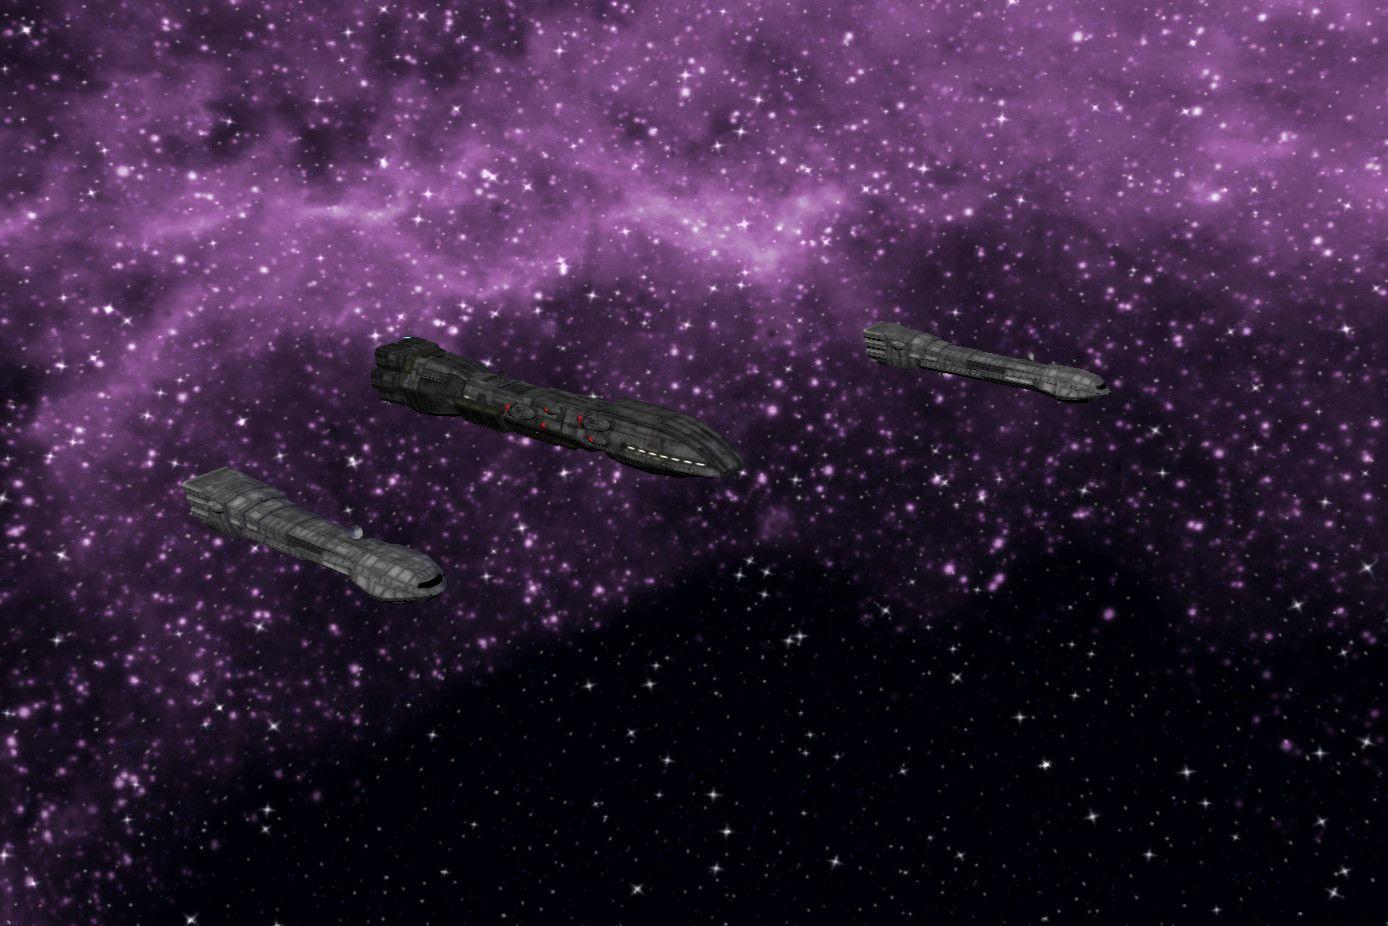 New Space Background image at War Mod for Star Wars